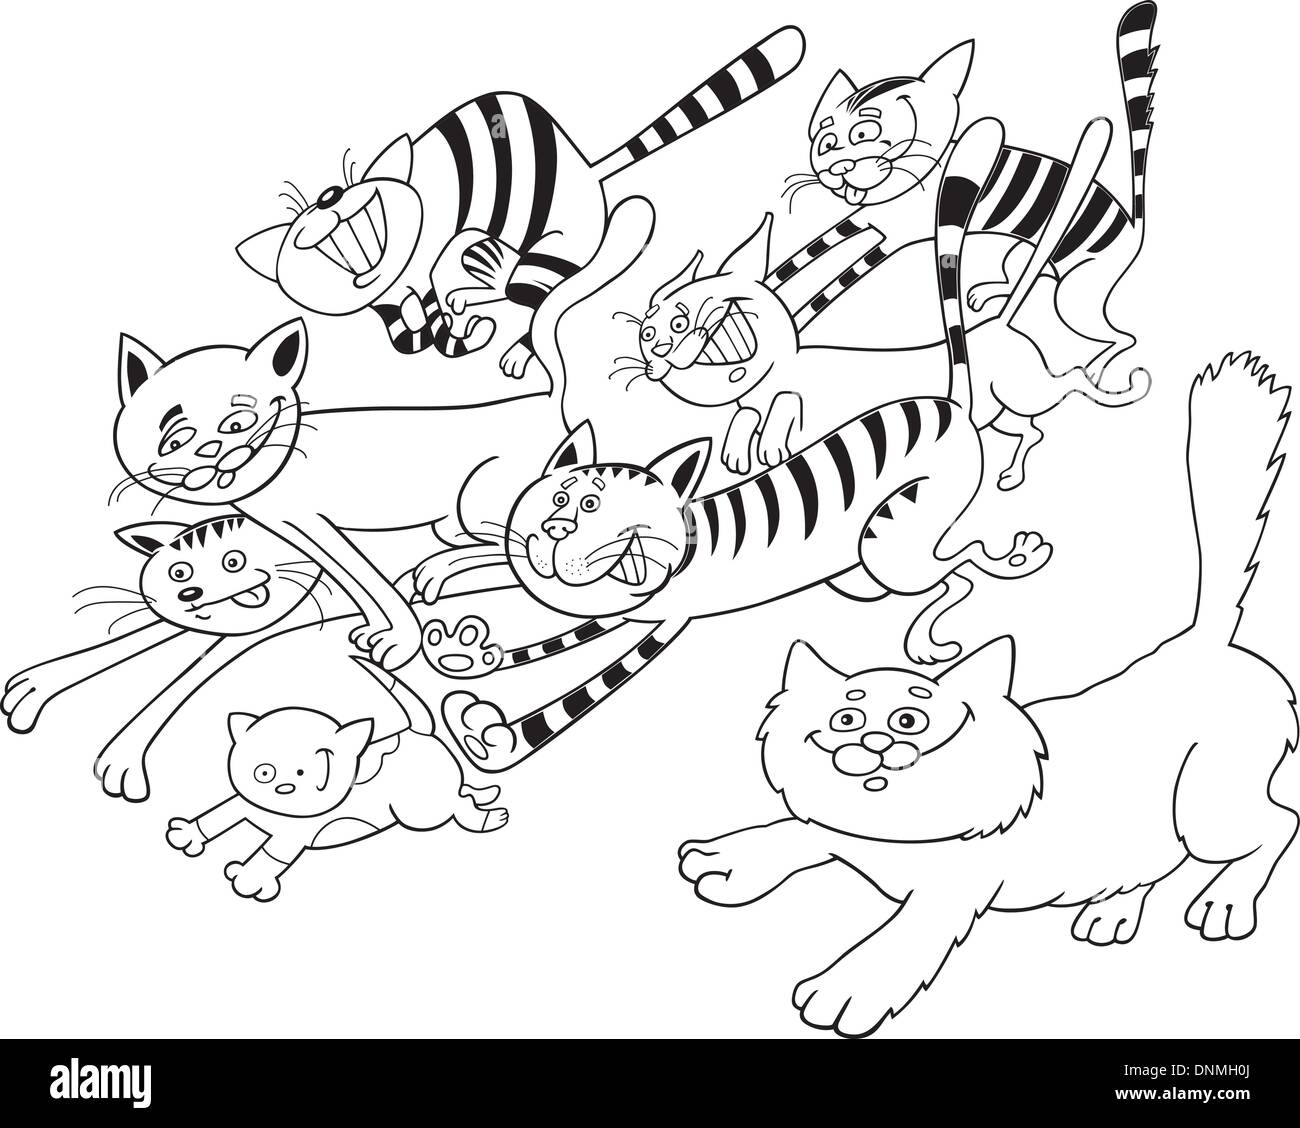 440  Tom Cat Coloring Pages  Latest Free